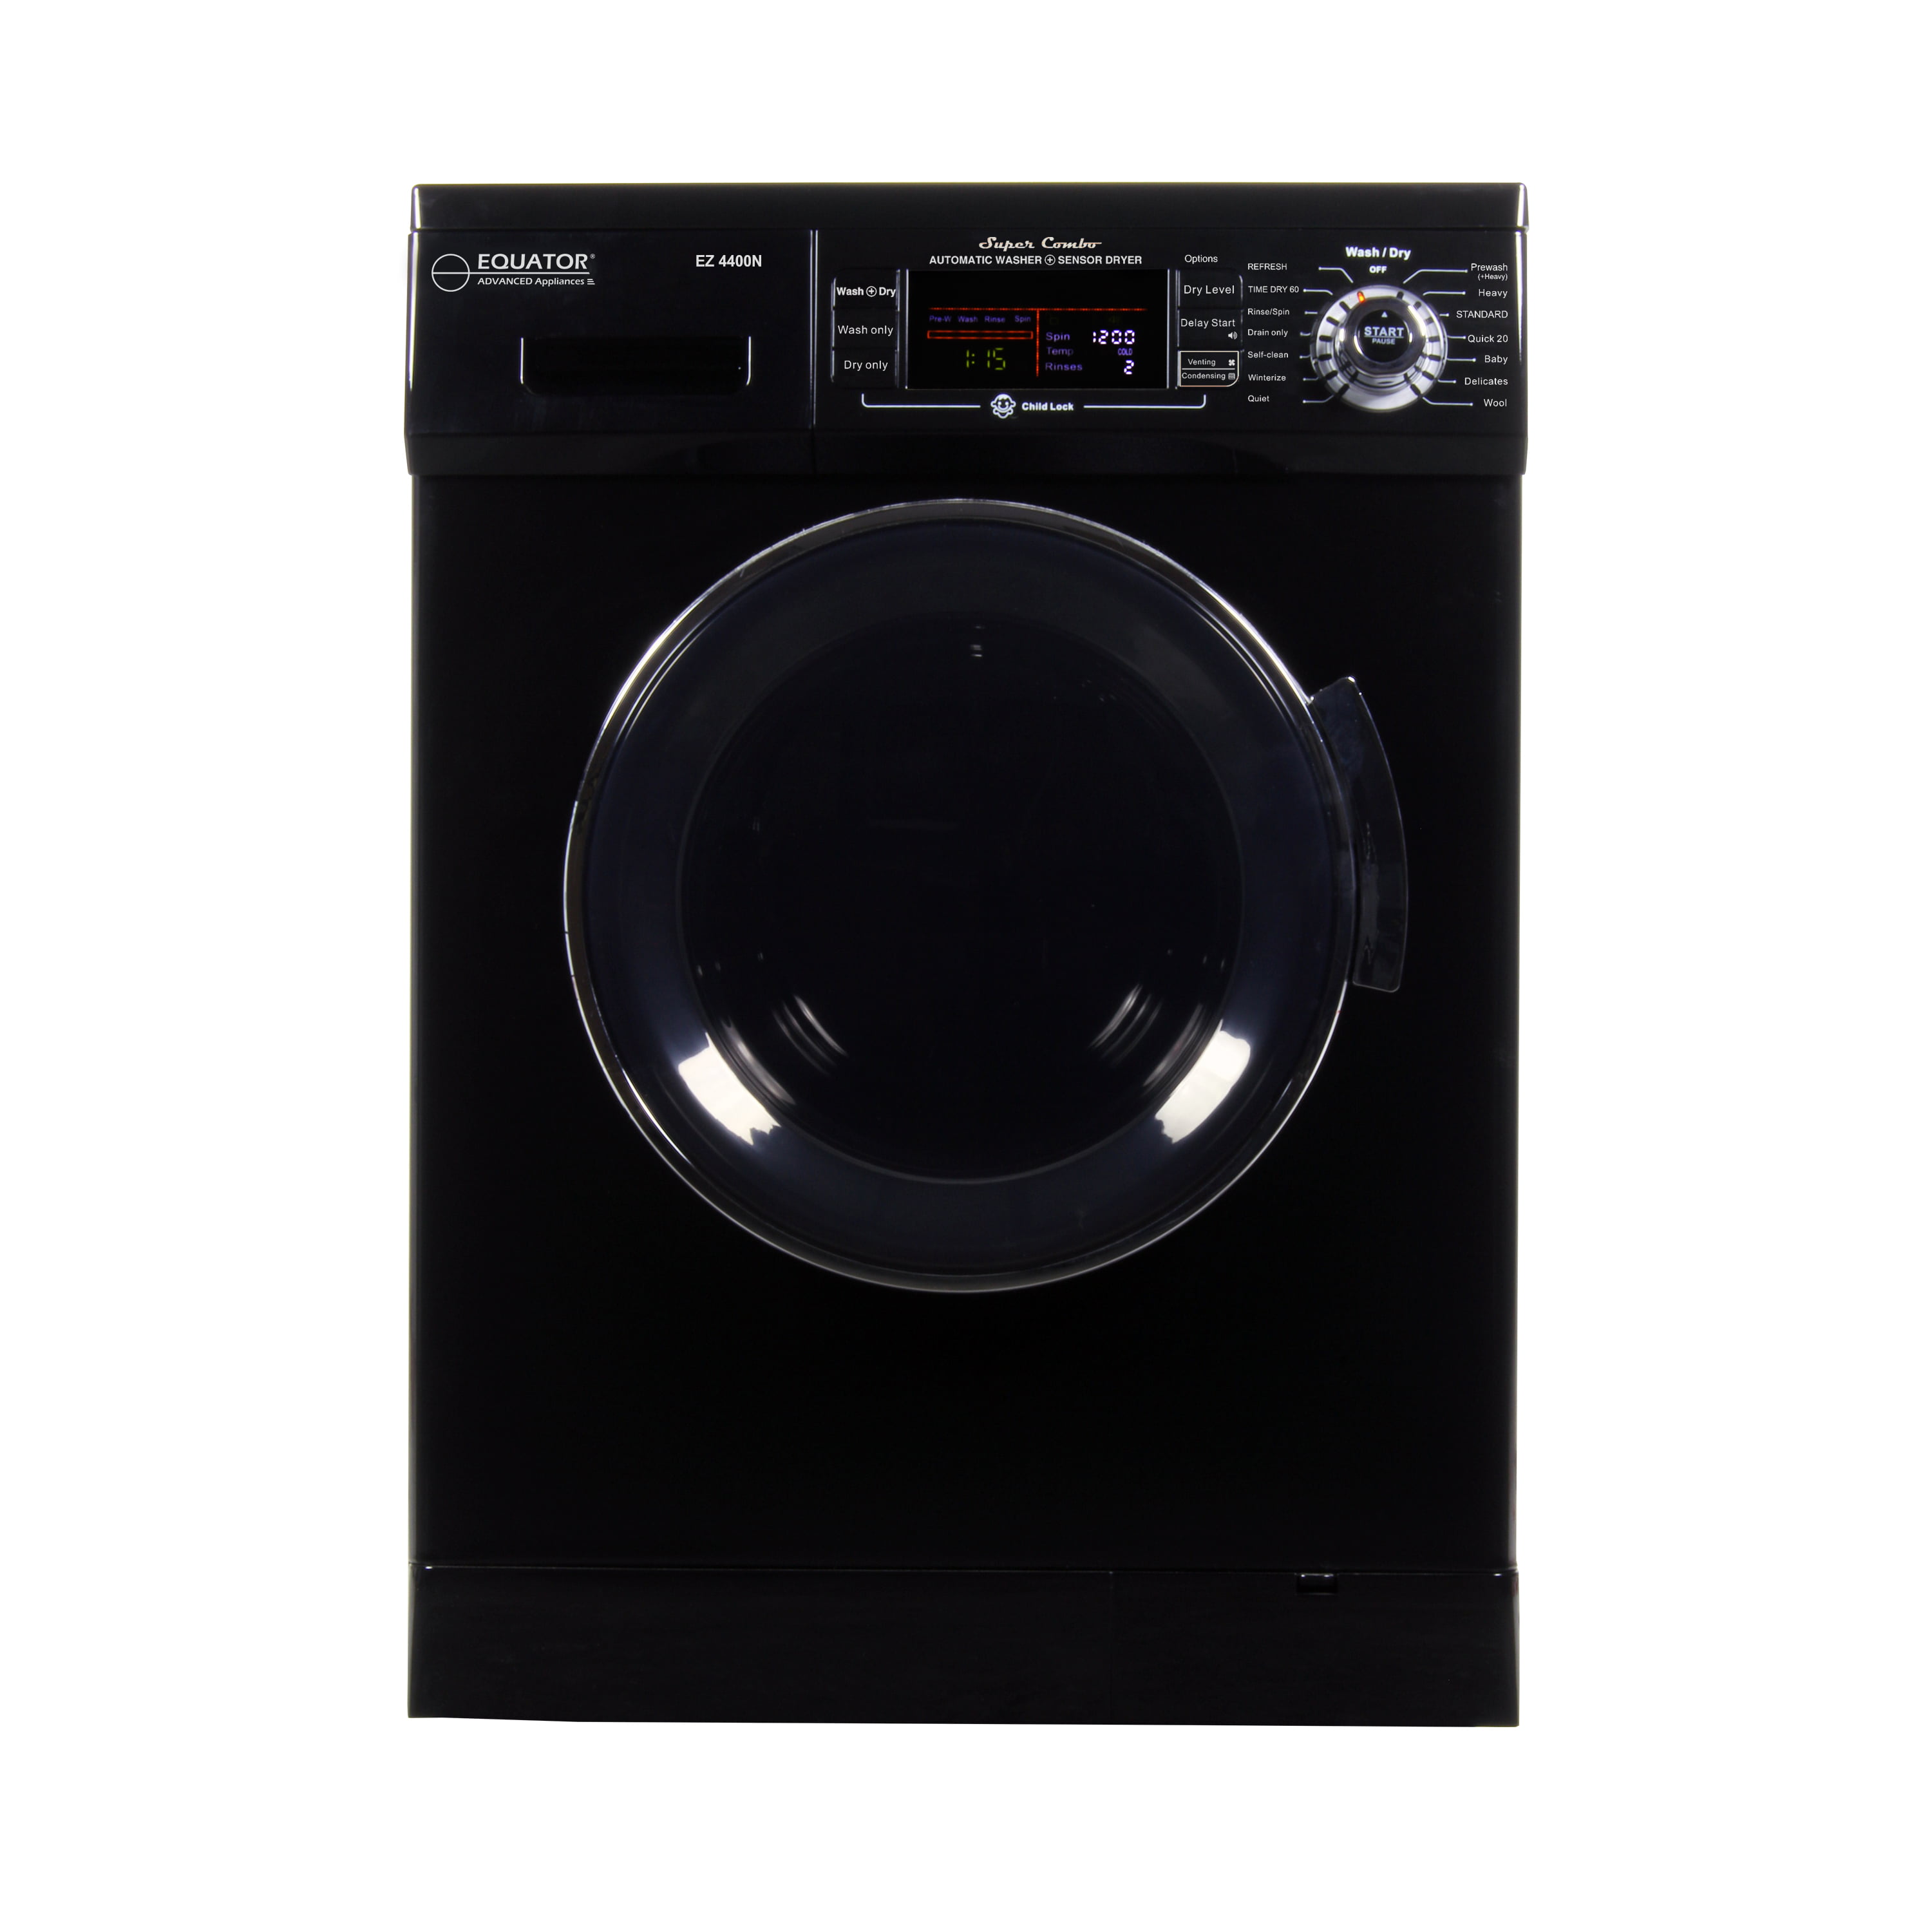 Black Washer And Dryer